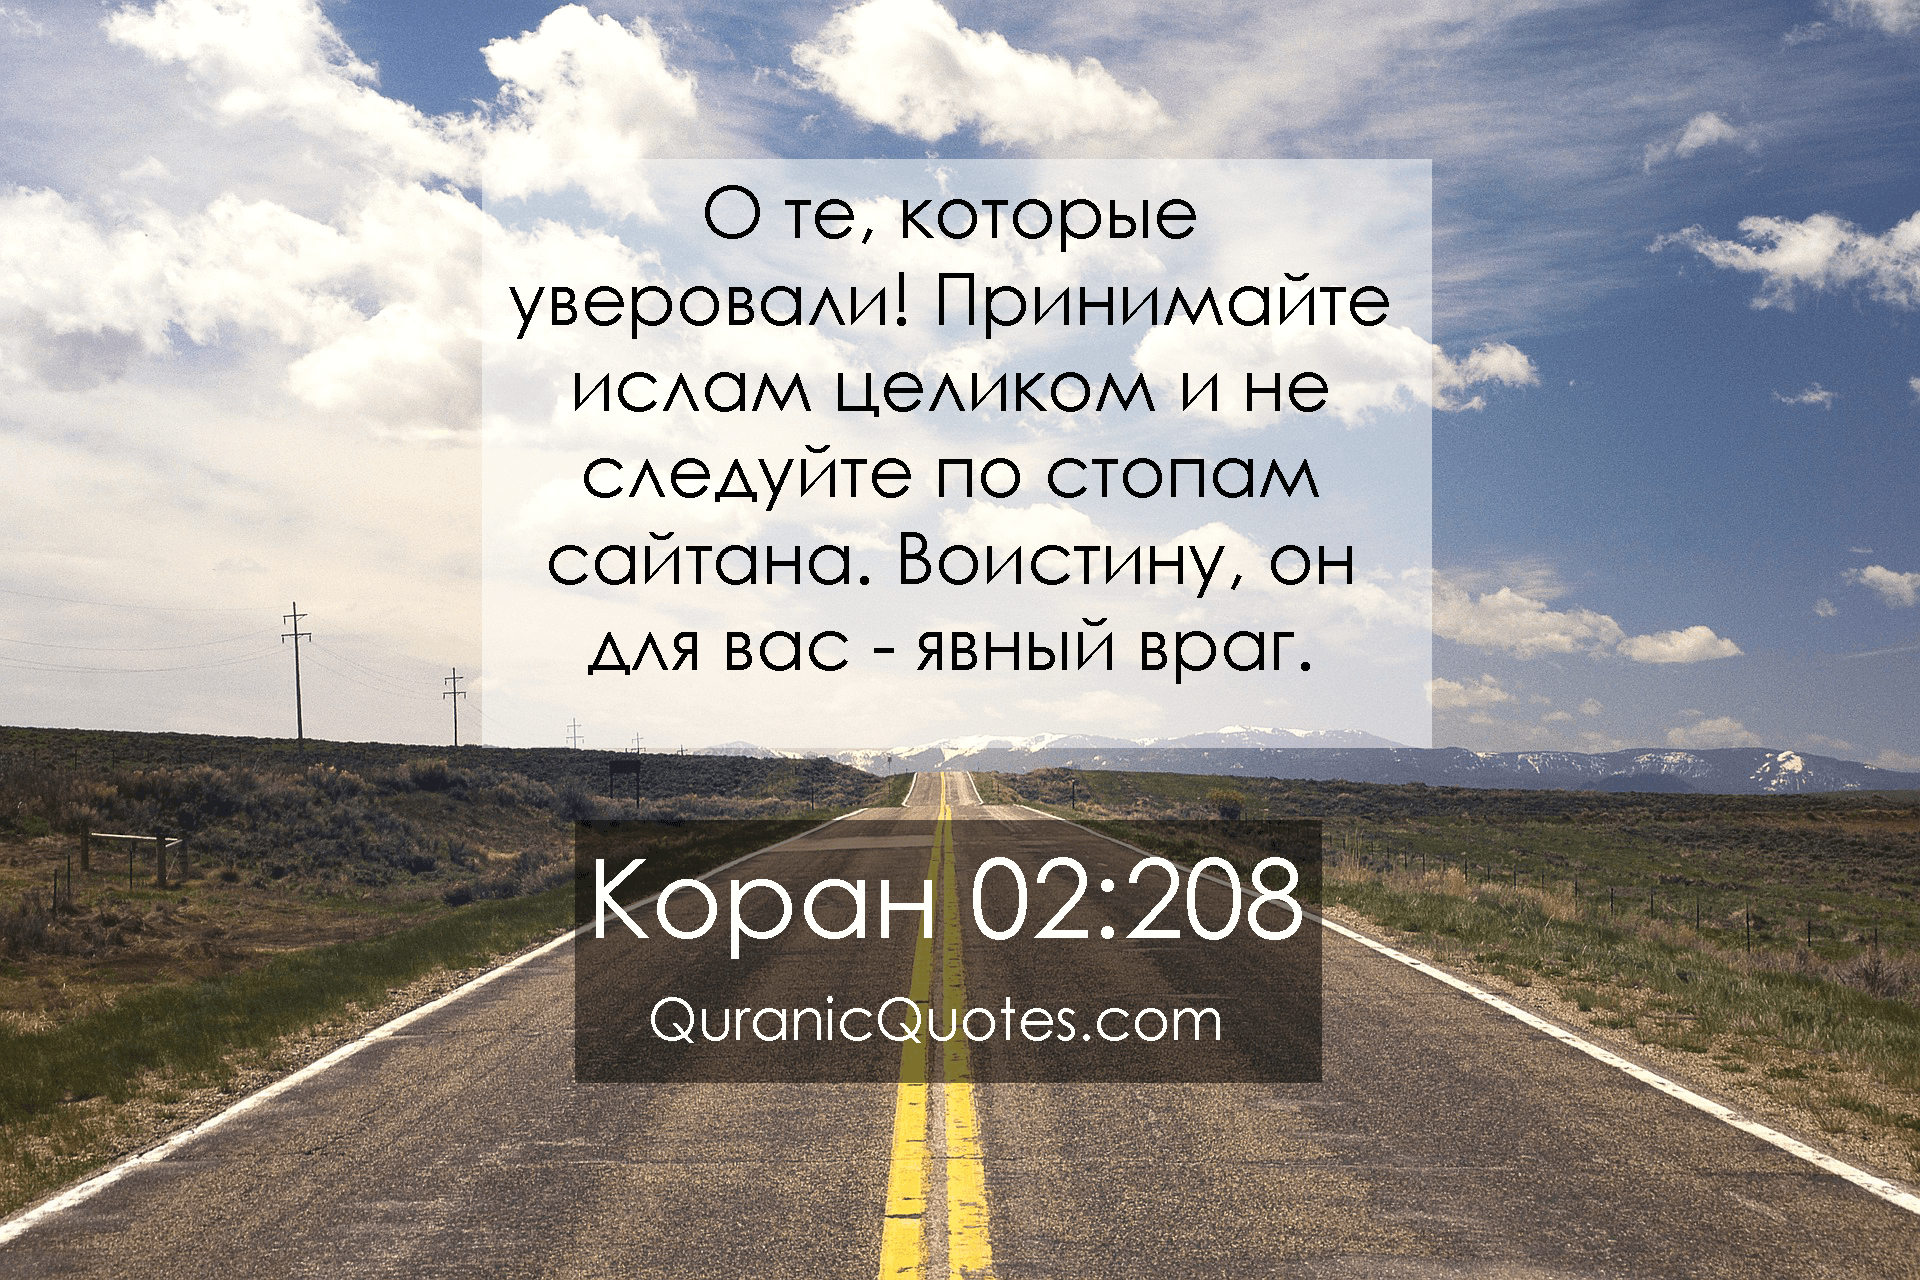 Quranic Quotes in Russian #02